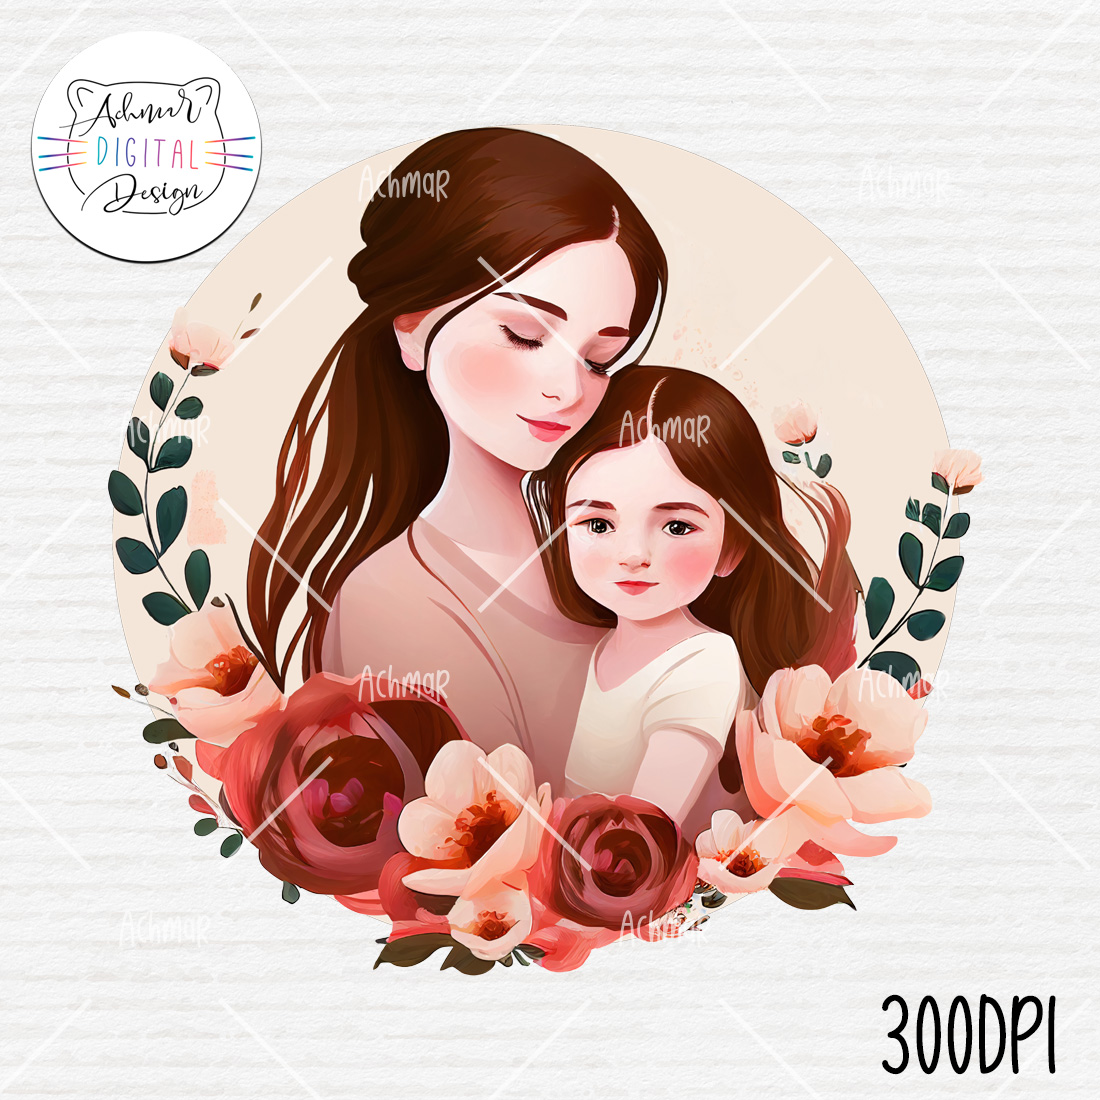 Mother's Day Design, Mom and Daughter cover image.